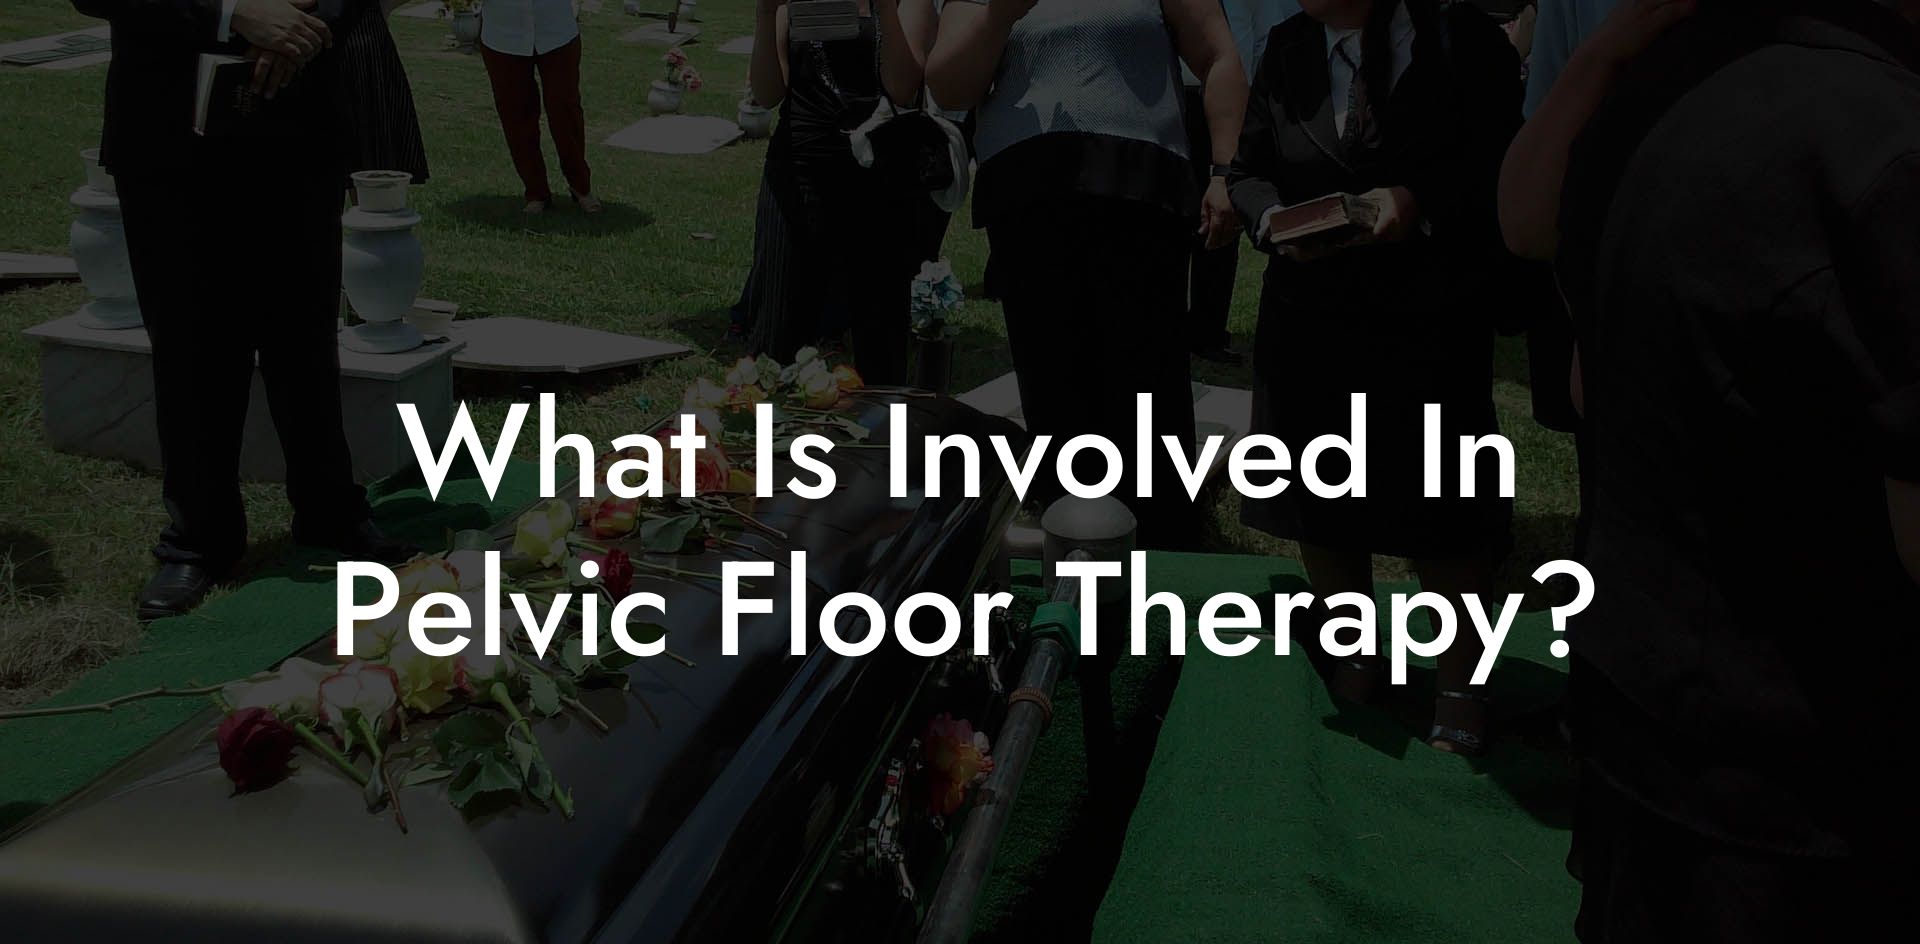 What Is Involved In Pelvic Floor Therapy?